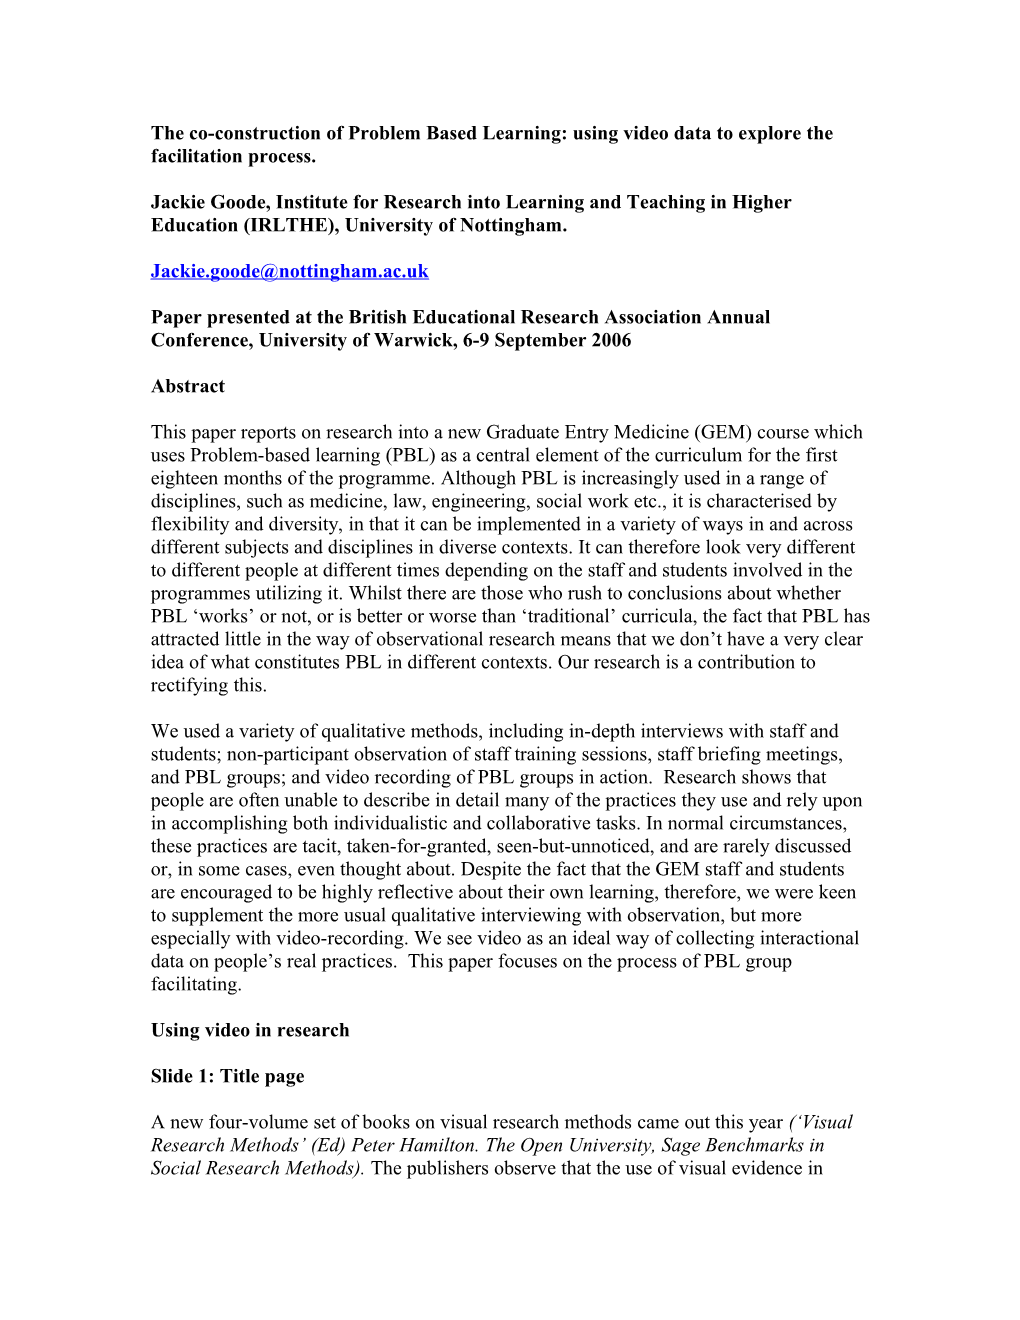 The Co-Construction of Problem Based Learning: Using Video Data to Explore the Facilitation